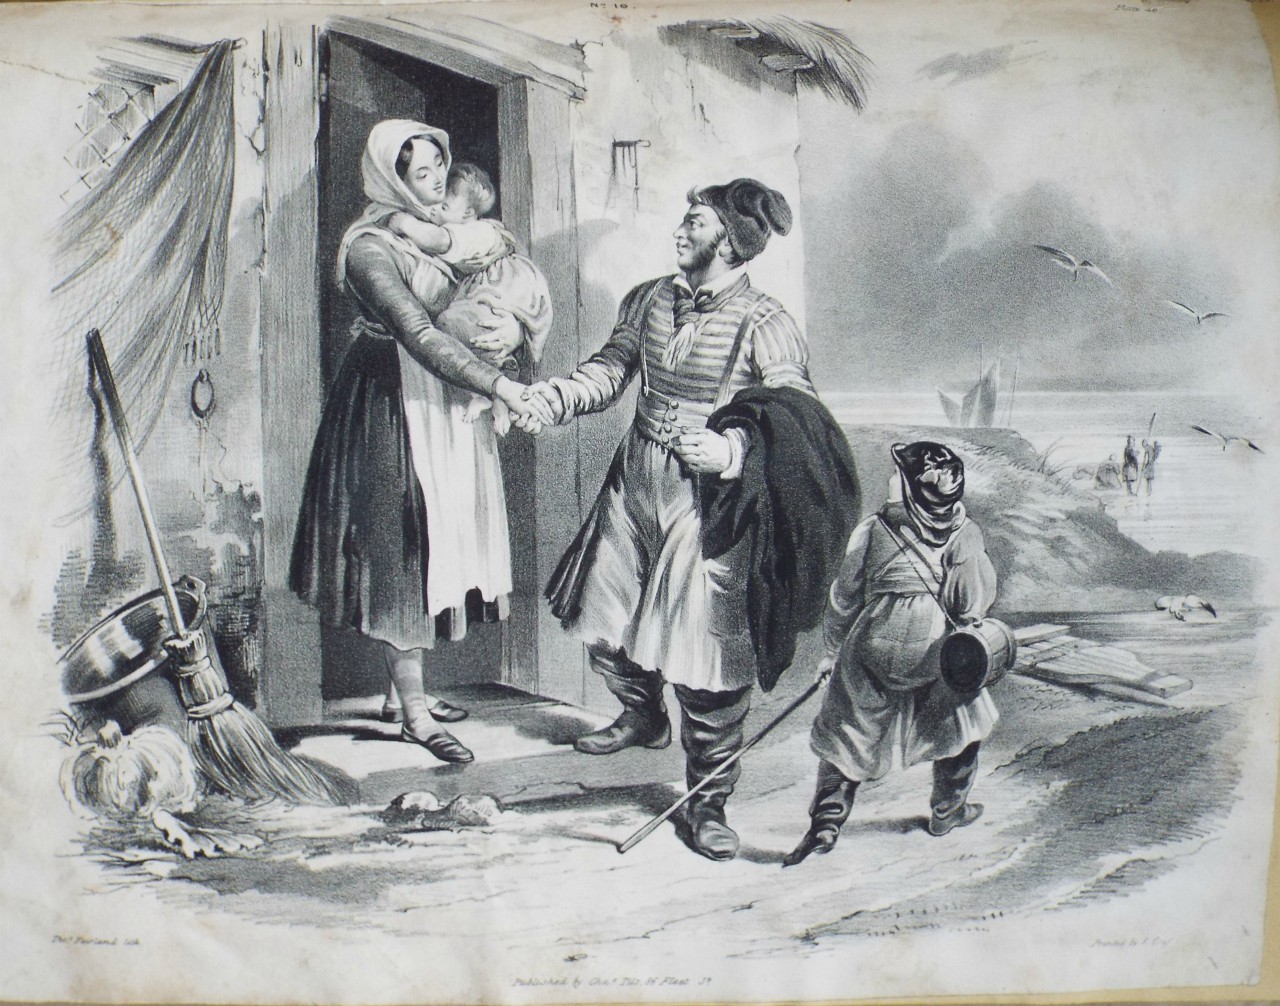 Lithograph - (The Fisherman's Departure) - Fairland